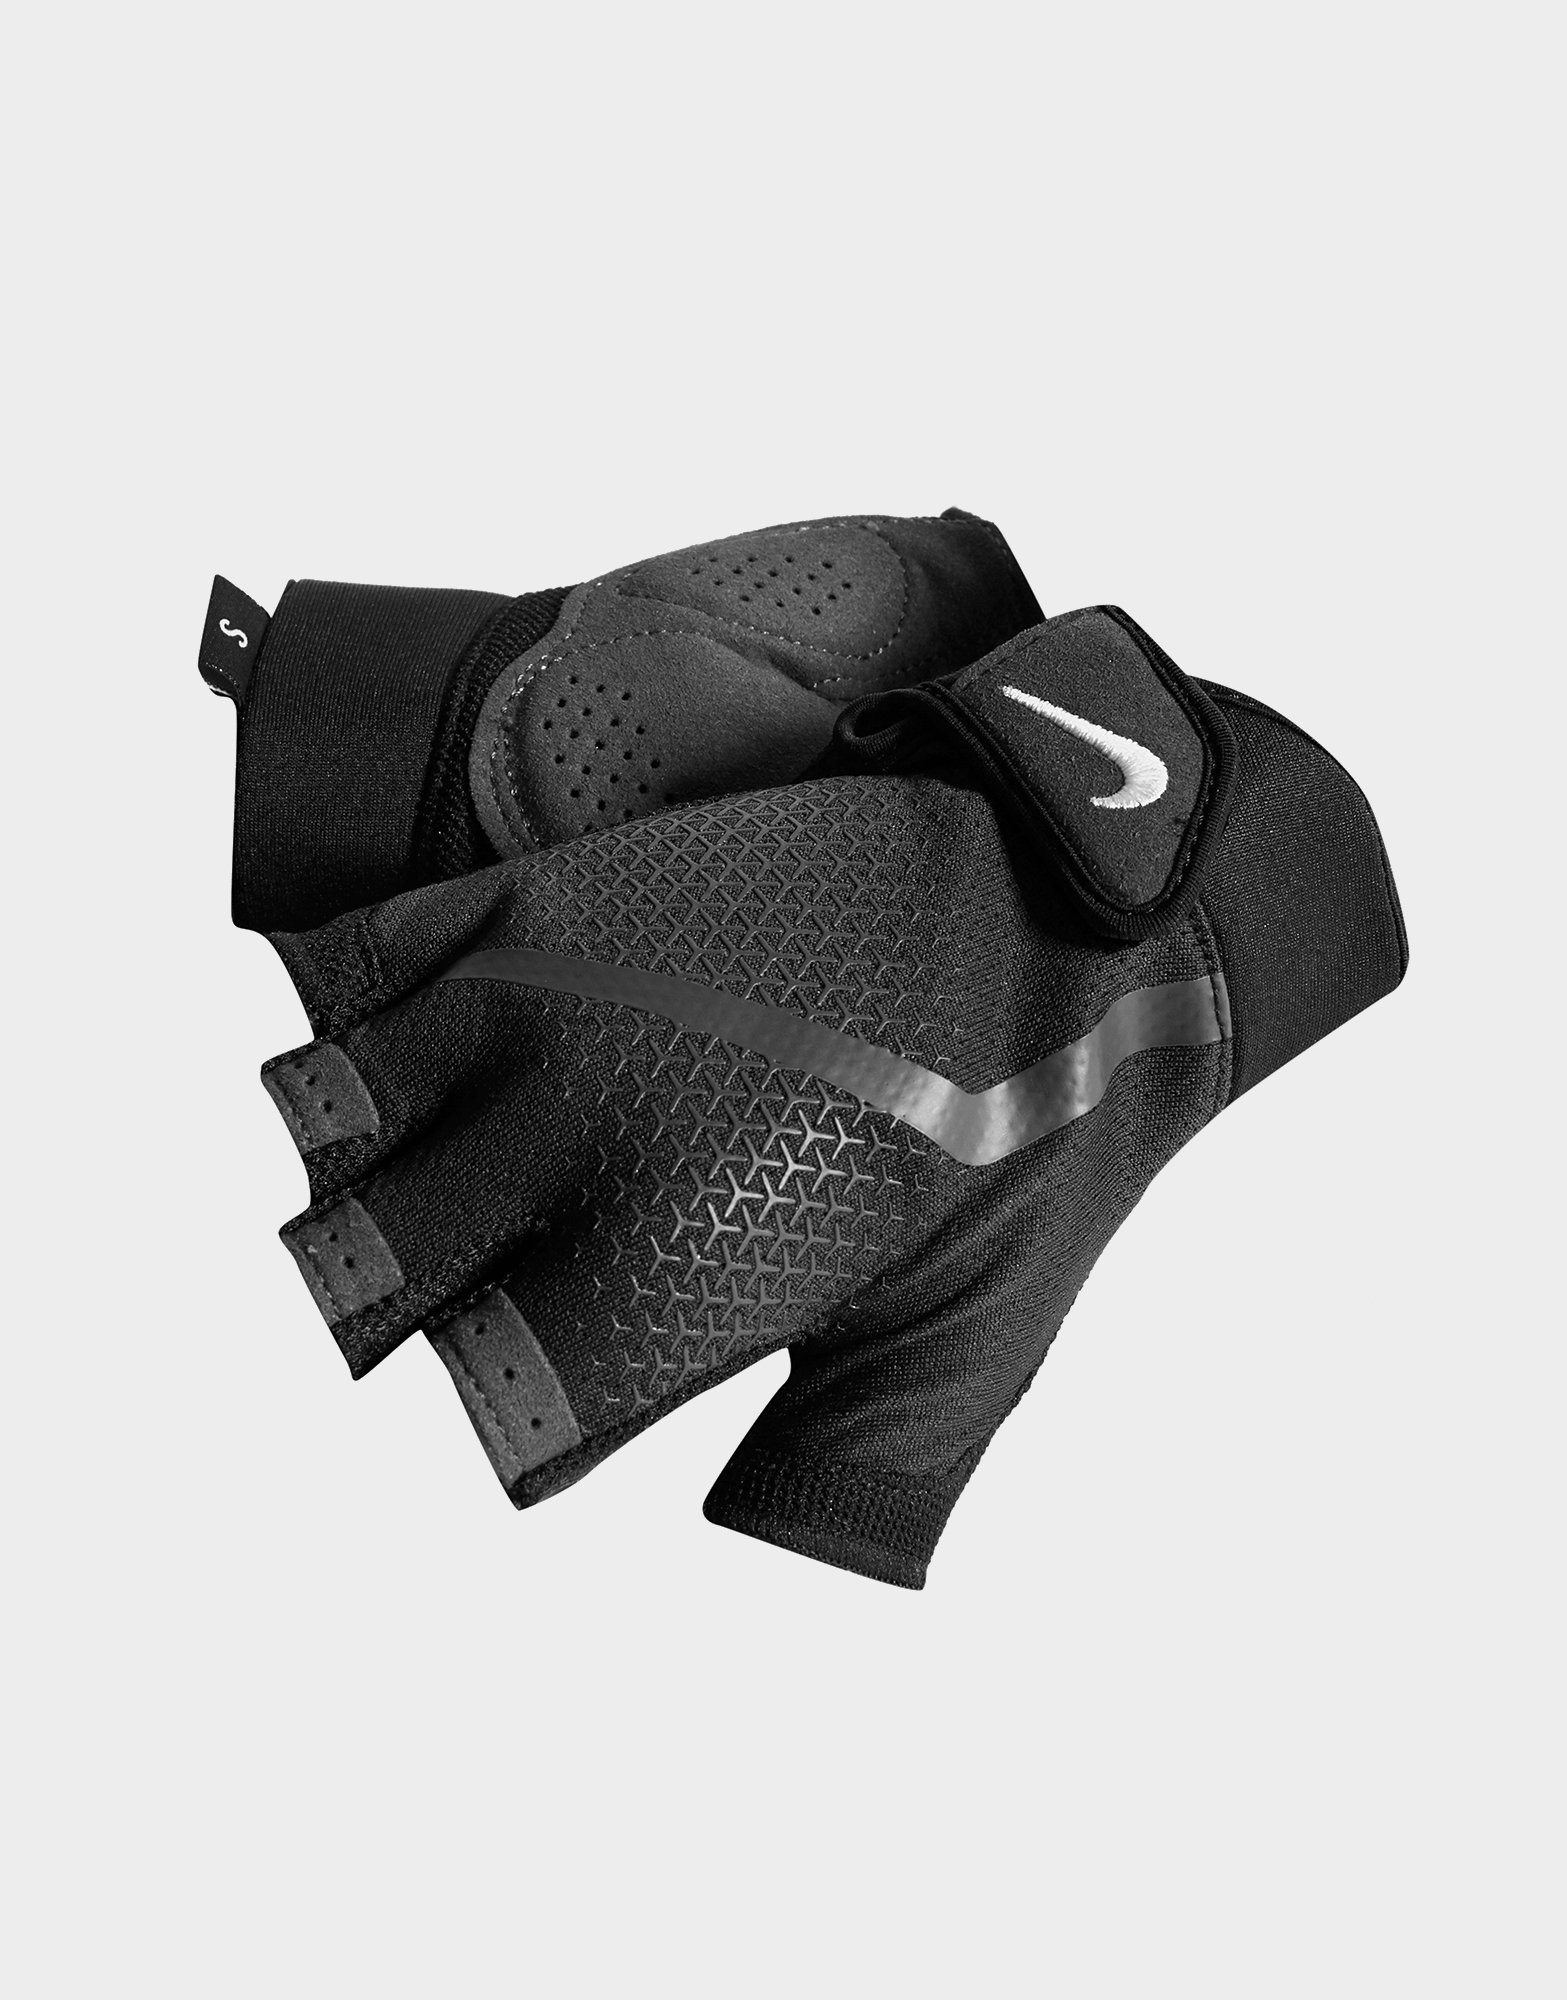 Nike Extreme Fitness Gloves | JD Sports Global